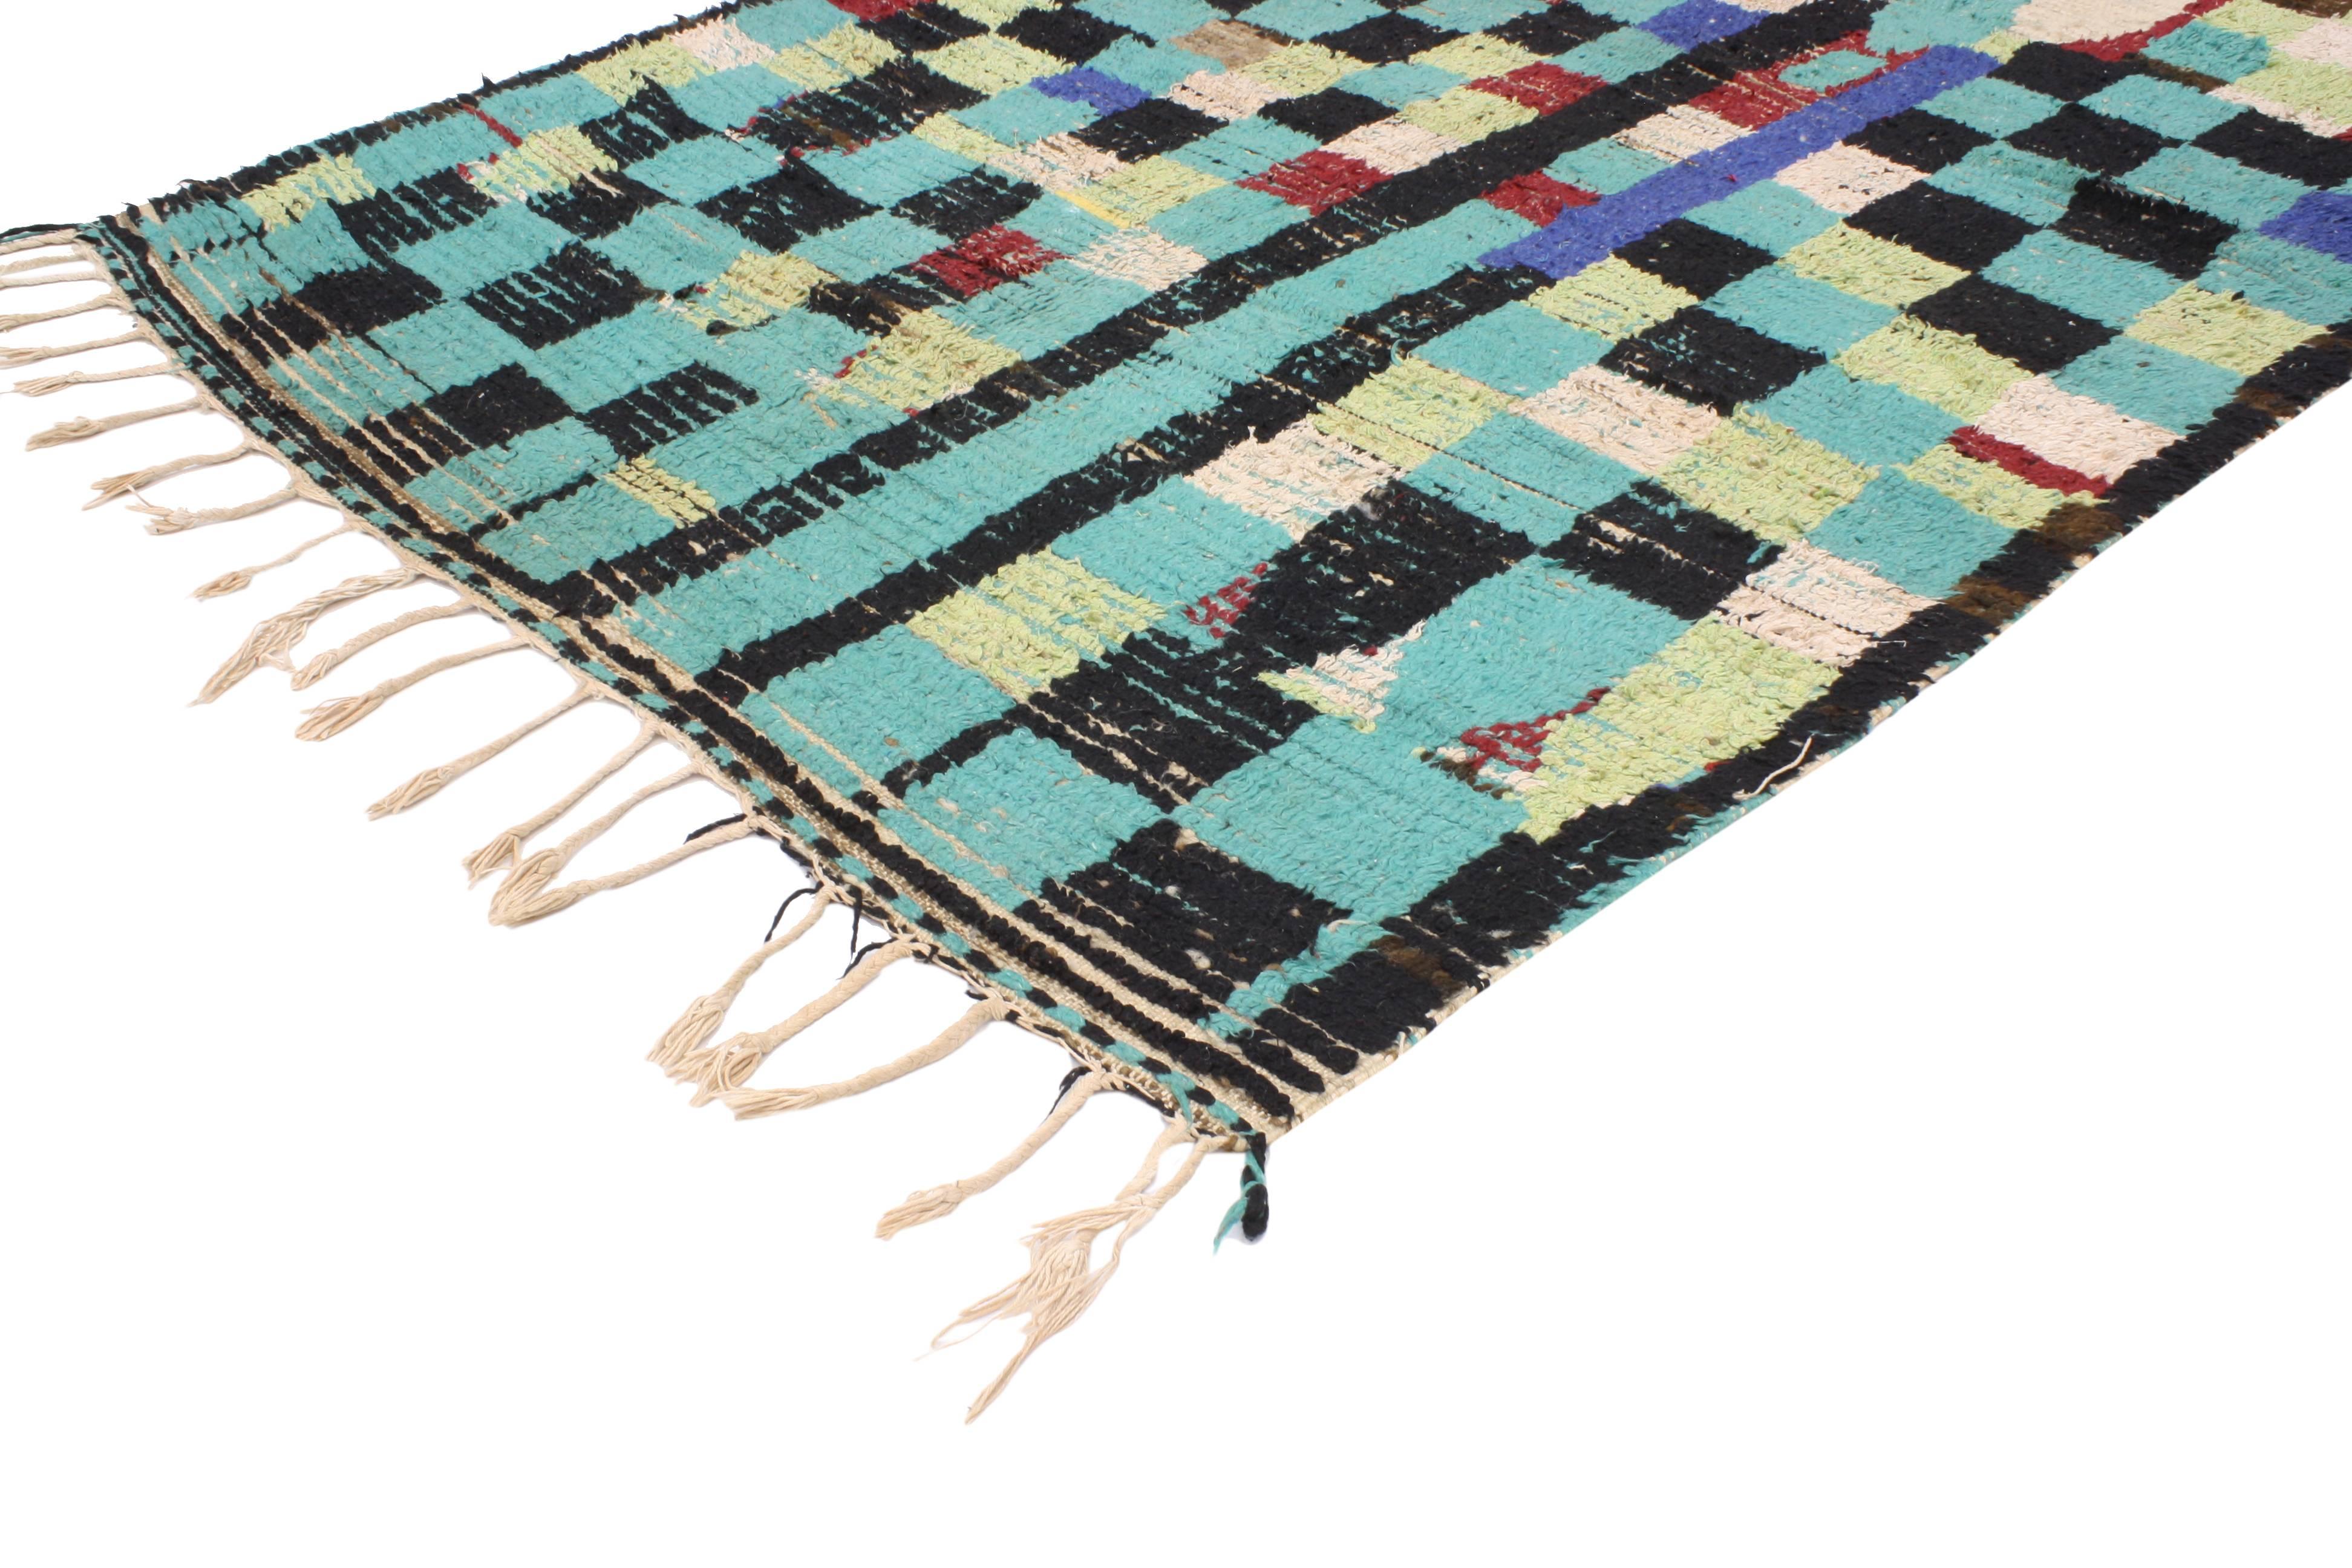 20439 Vintage Berber Moroccan Rug with Cubist Bauhaus Style. This hand-knotted wool vintage Moroccan rug features a geometric pattern composed of squares and rectangles (rods). The squares and rectangular rods unite to create a truly unique look.